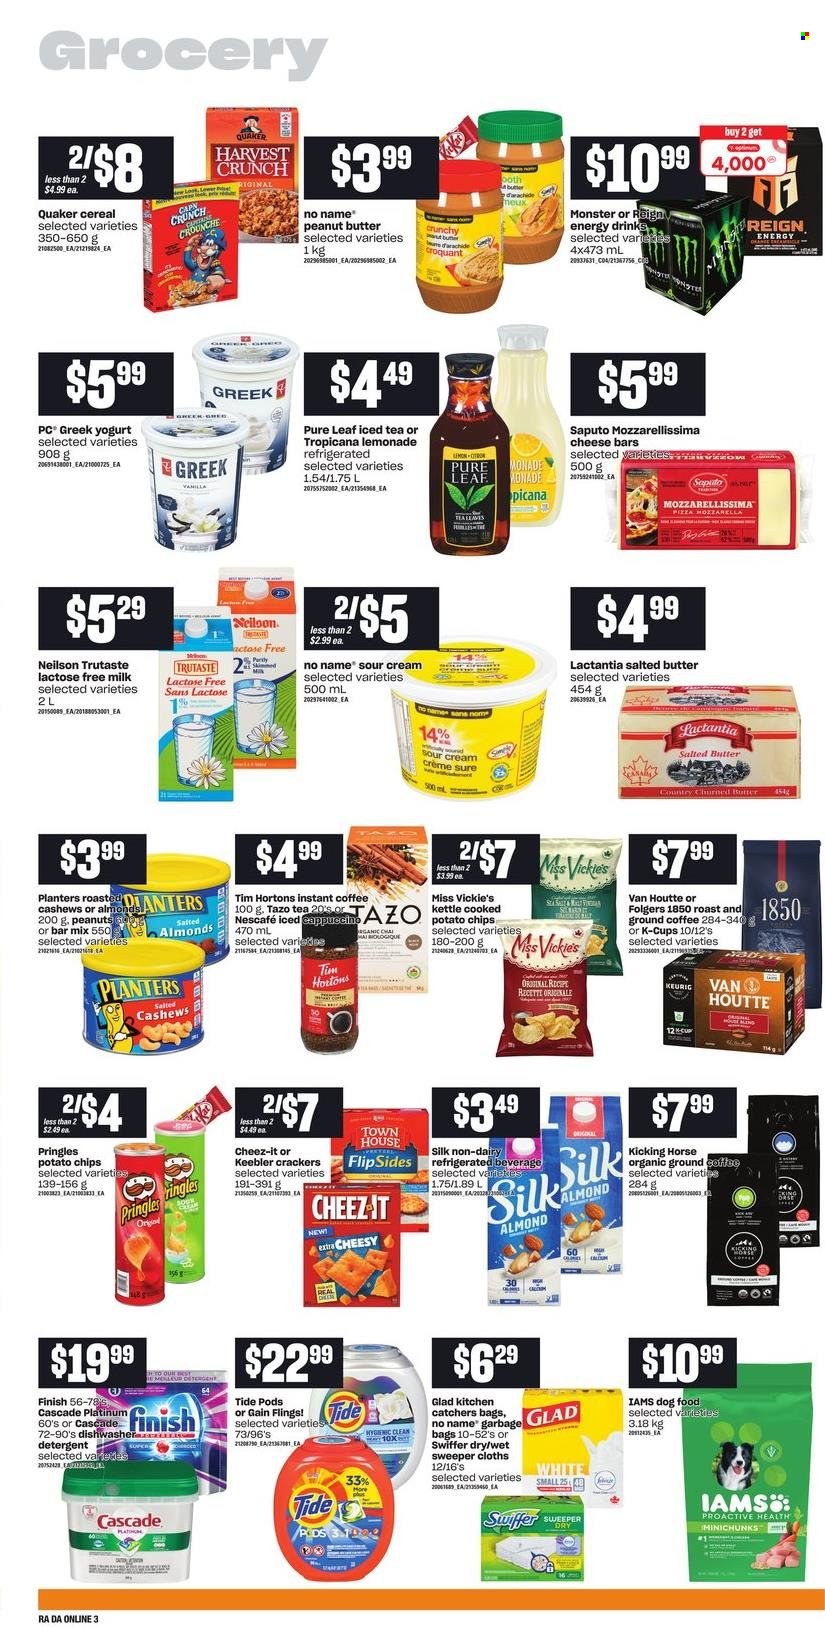 thumbnail - Atlantic Superstore Flyer - October 28, 2021 - November 03, 2021 - Sales products - No Name, pizza, Quaker, greek yoghurt, yoghurt, milk, lactose free milk, Silk, salted butter, sour cream, crackers, Keebler, potato chips, Pringles, Cheez-It, cereals, peanut butter, almonds, cashews, peanuts, Planters, lemonade, energy drink, Monster, ice tea, Pure Leaf, instant coffee, Folgers, ground coffee, coffee capsules, K-Cups, Keurig, Gain, Swiffer, Tide, Cascade, Sure, bag, animal food, dog food, Iams, detergent, chips, Nescafé. Page 7.